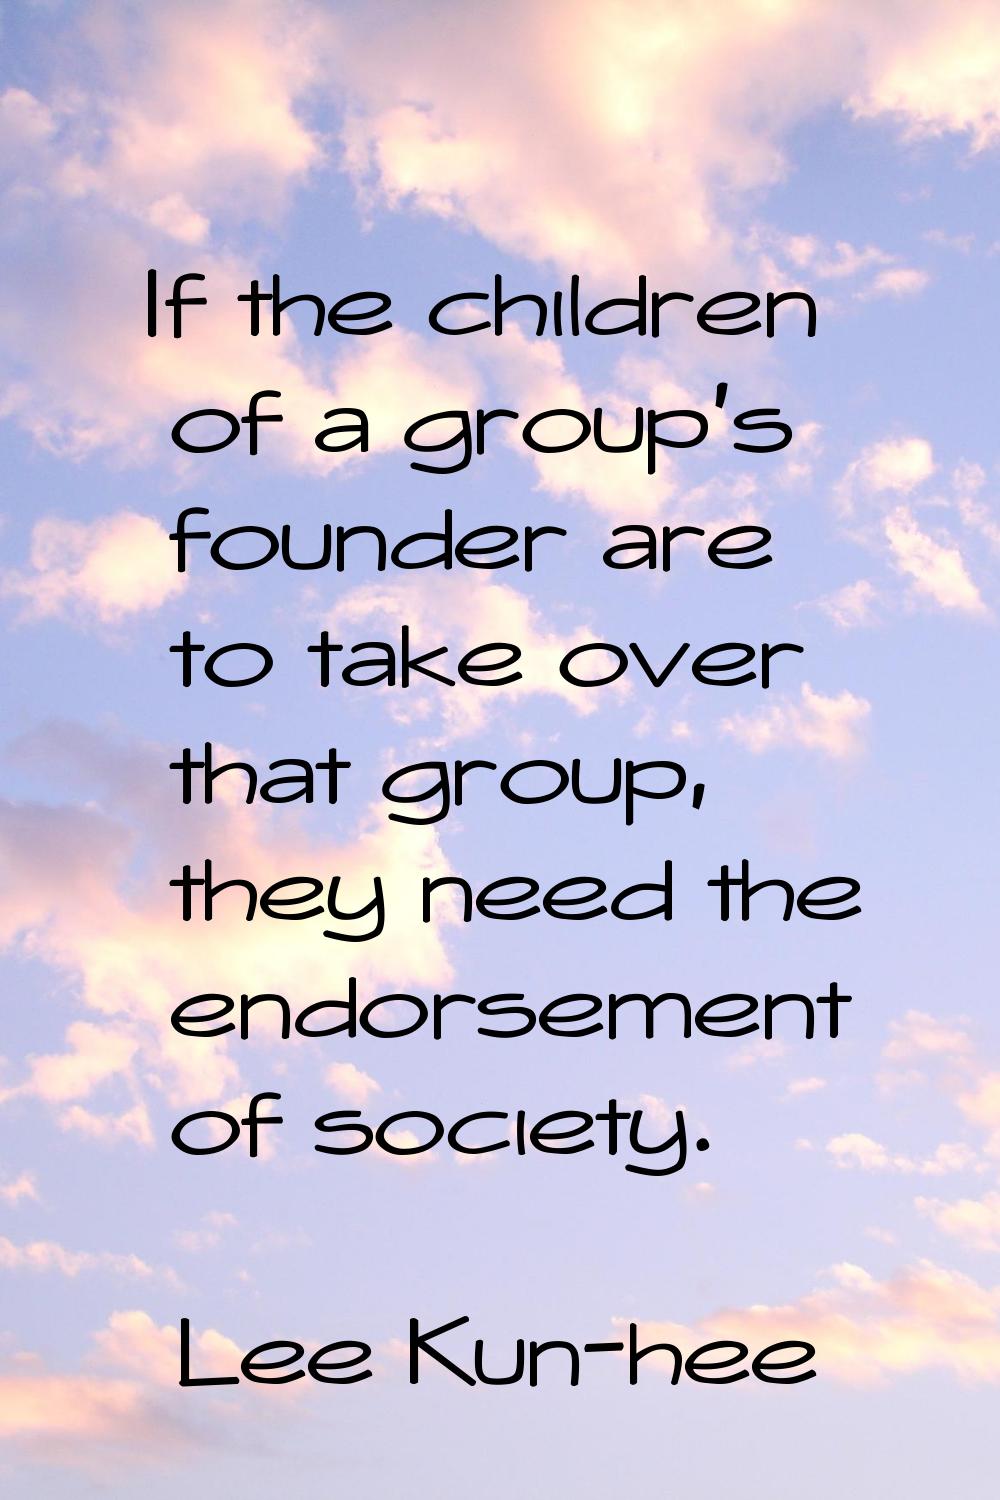 If the children of a group's founder are to take over that group, they need the endorsement of soci